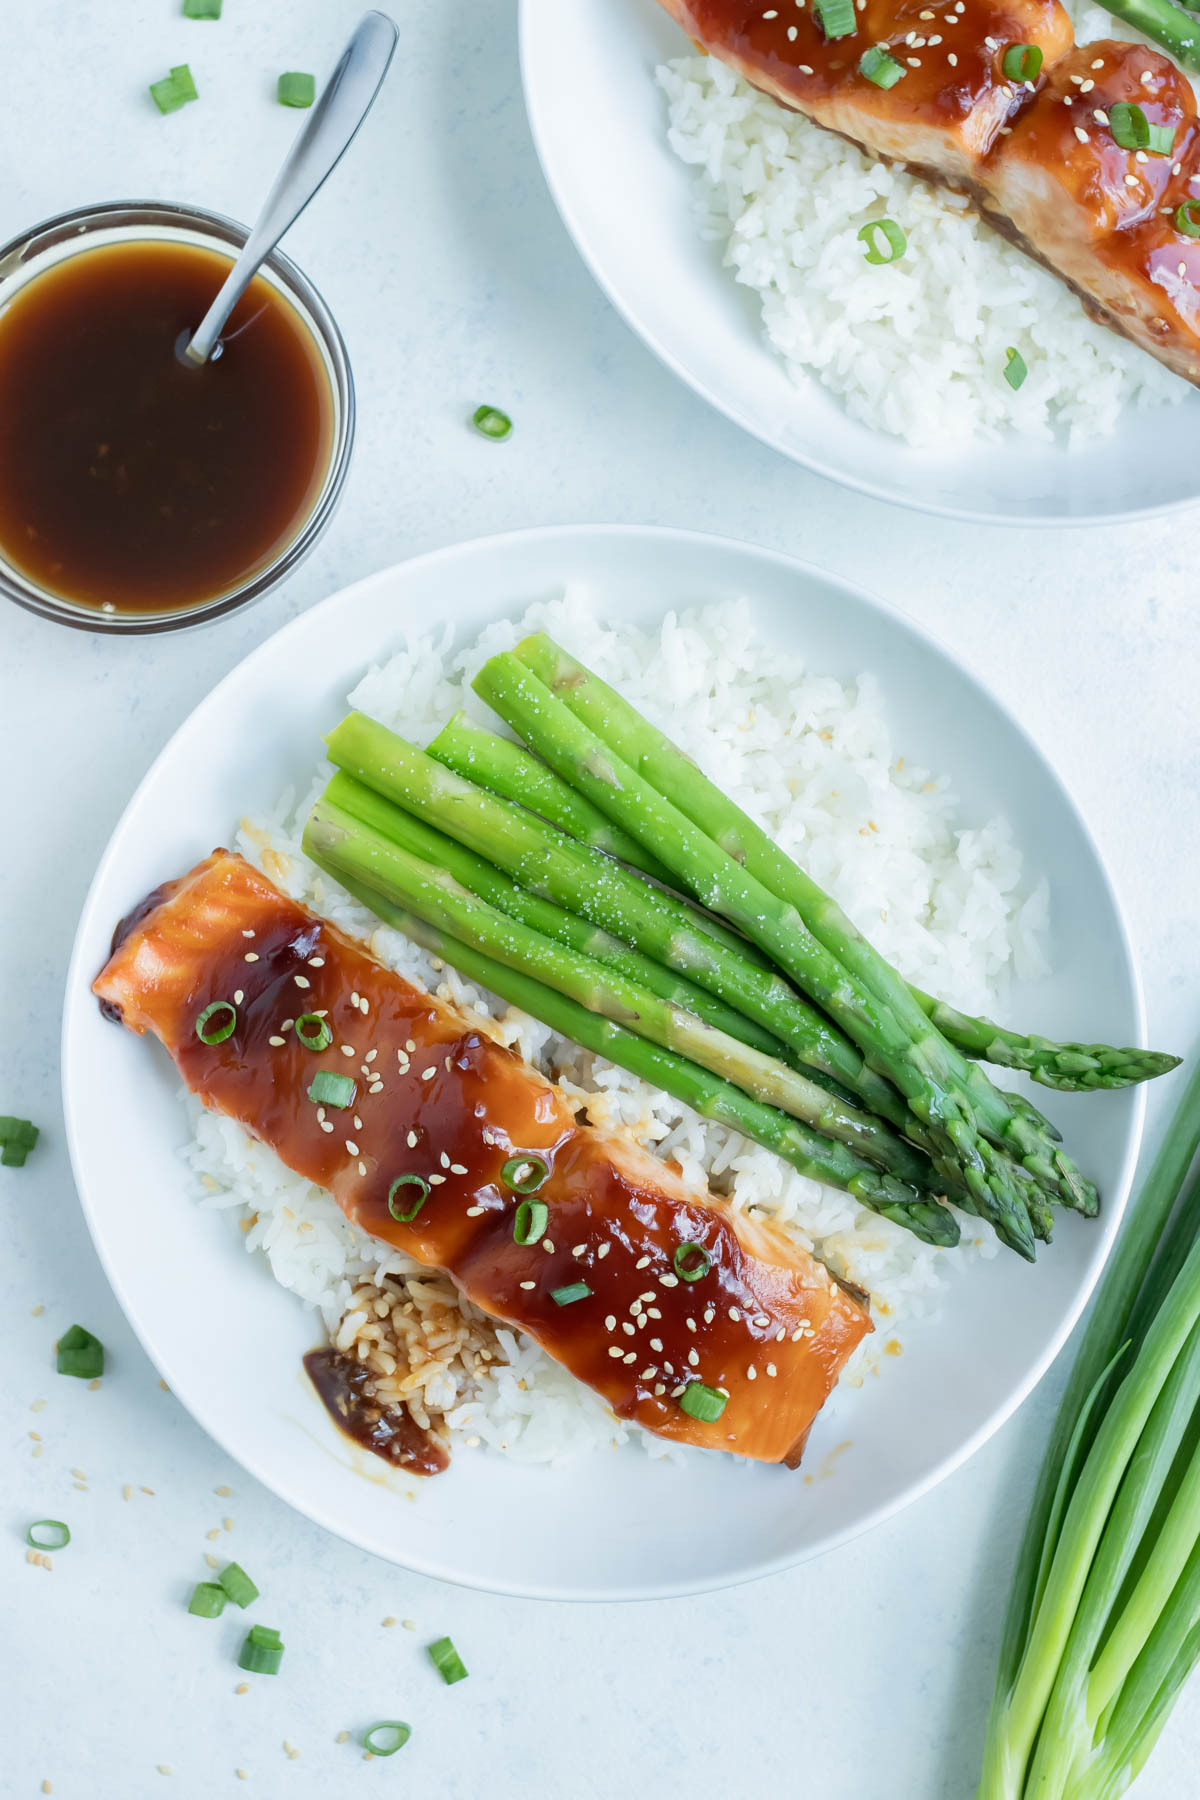 White rice, asparagus, and teriyaki salmon are served for a healthy dinner.